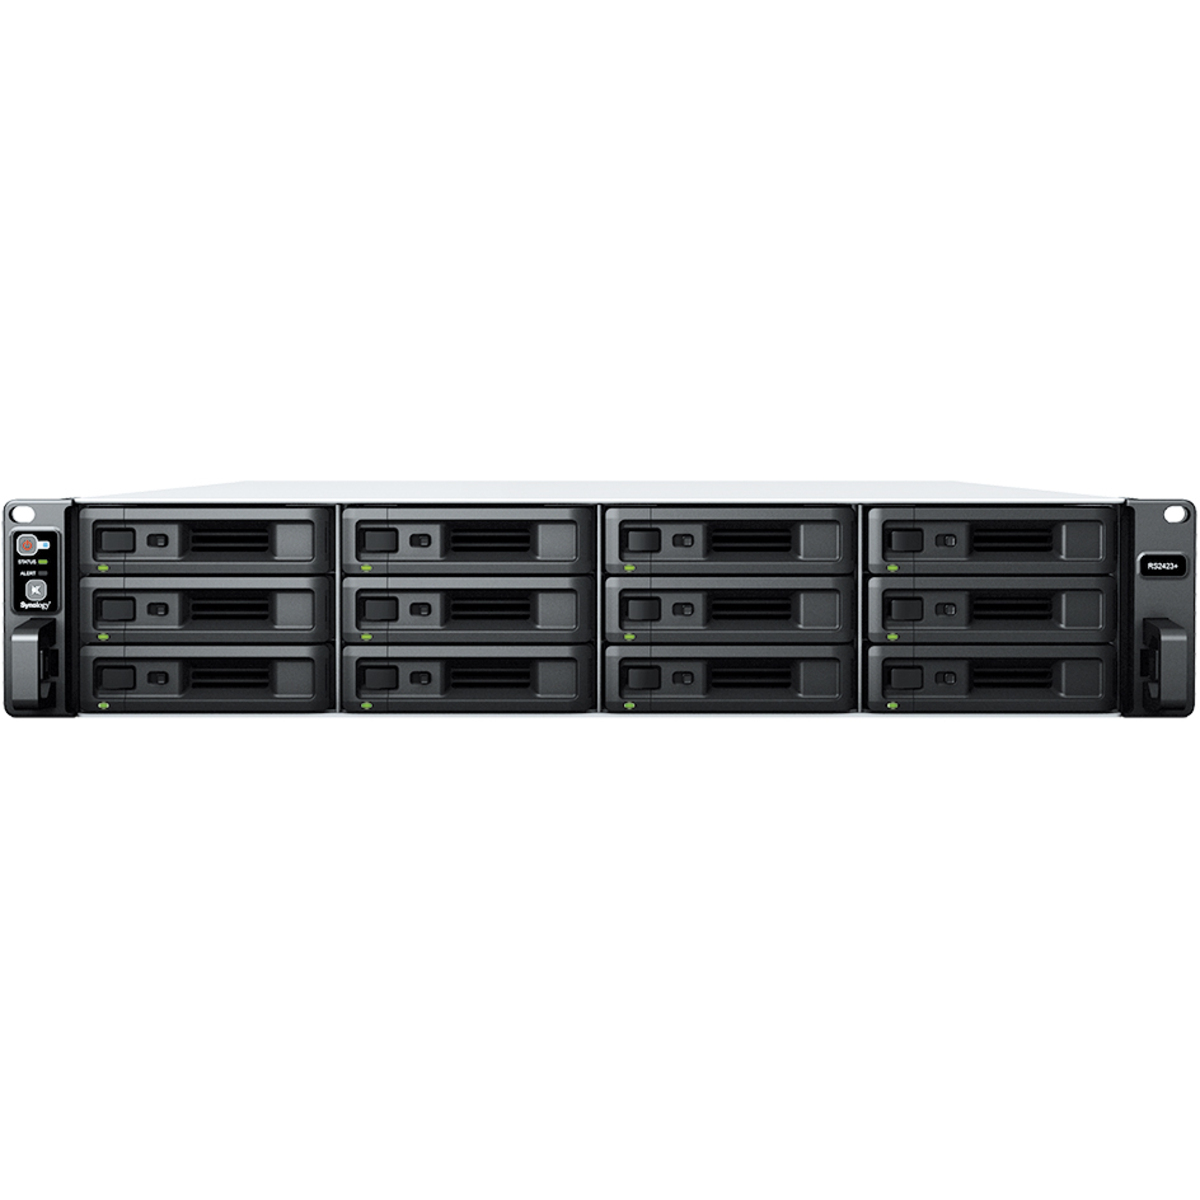 Synology RackStation RS2423+ 56tb 12-Bay RackMount Multimedia / Power User / Business NAS - Network Attached Storage Device 7x8tb Synology Plus Series HAT3310-8T 3.5 7200rpm SATA 6Gb/s HDD NAS Class Drives Installed - Burn-In Tested RackStation RS2423+